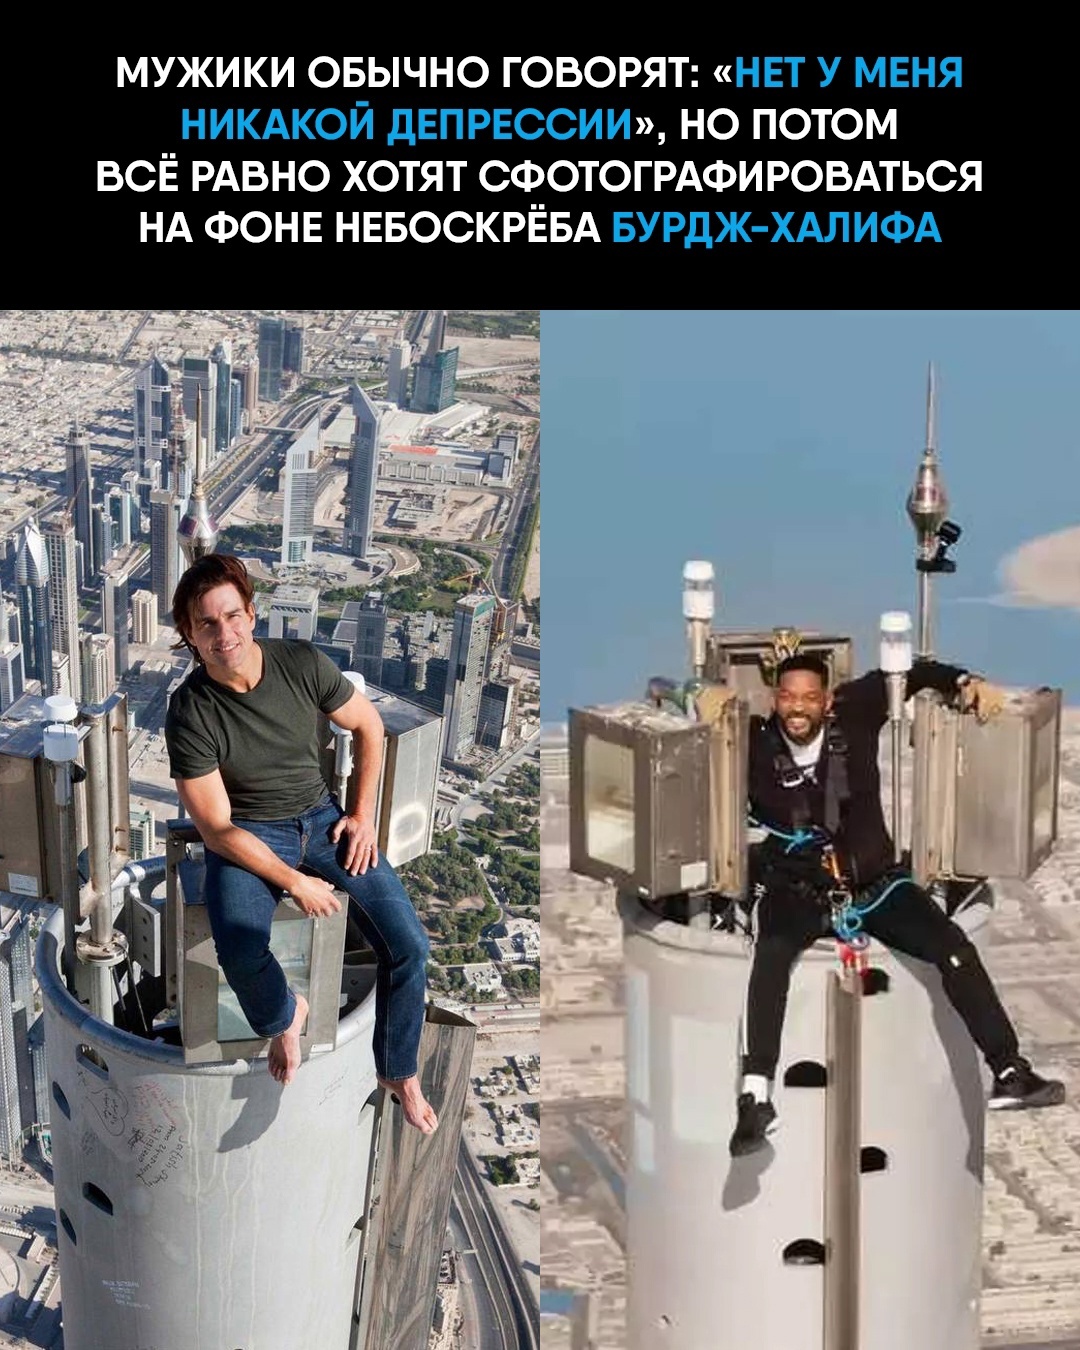 Post #11551640 - Actors and actresses, Tom Cruise, Will Smith, Celebrities, Hollywood, Movies, Photos from filming, mission Impossible, Humor, VKontakte (link), Picture with text